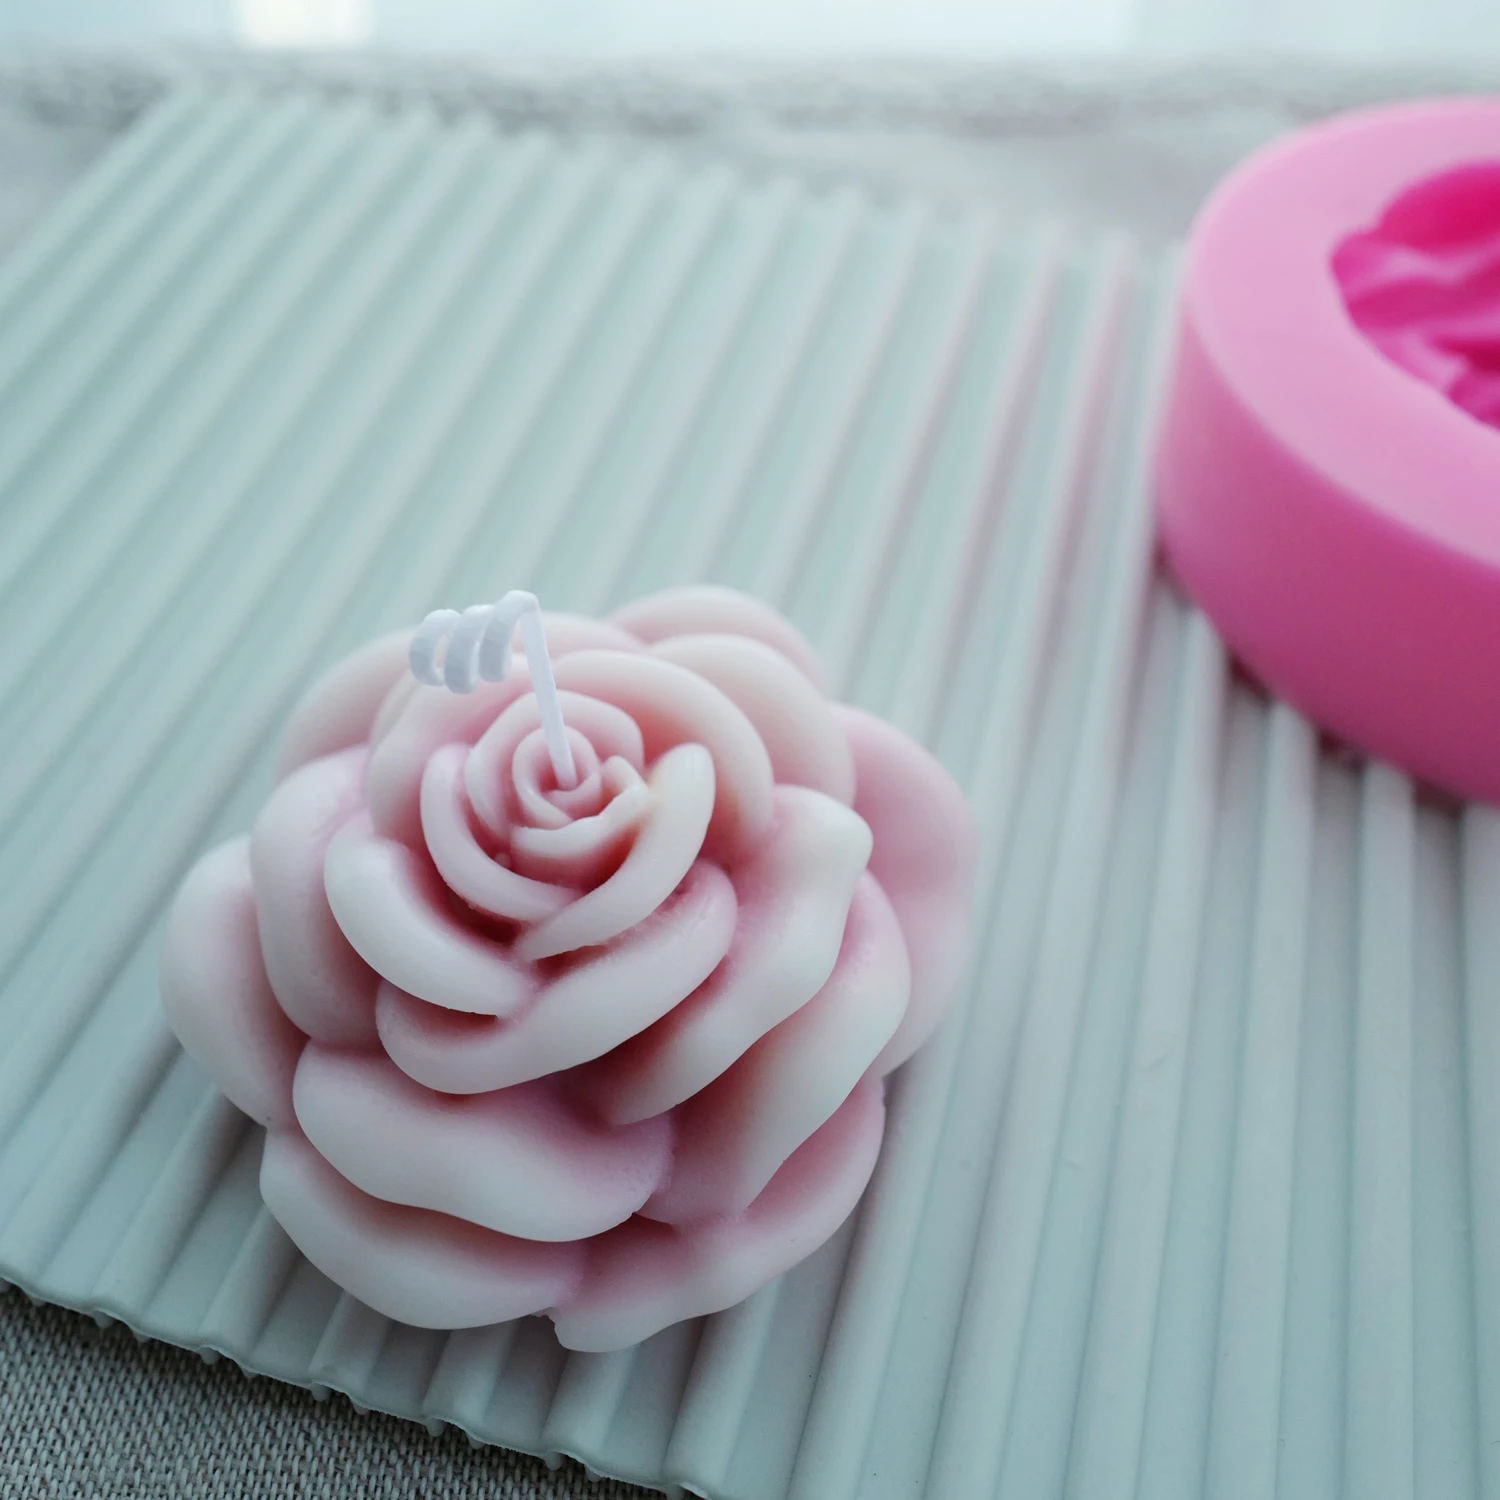 3D Rose Flower Candle Mold for Candle Making Silicone Mold Clay Resin  Gypsum Mould Handmade Party Favors - AliExpress